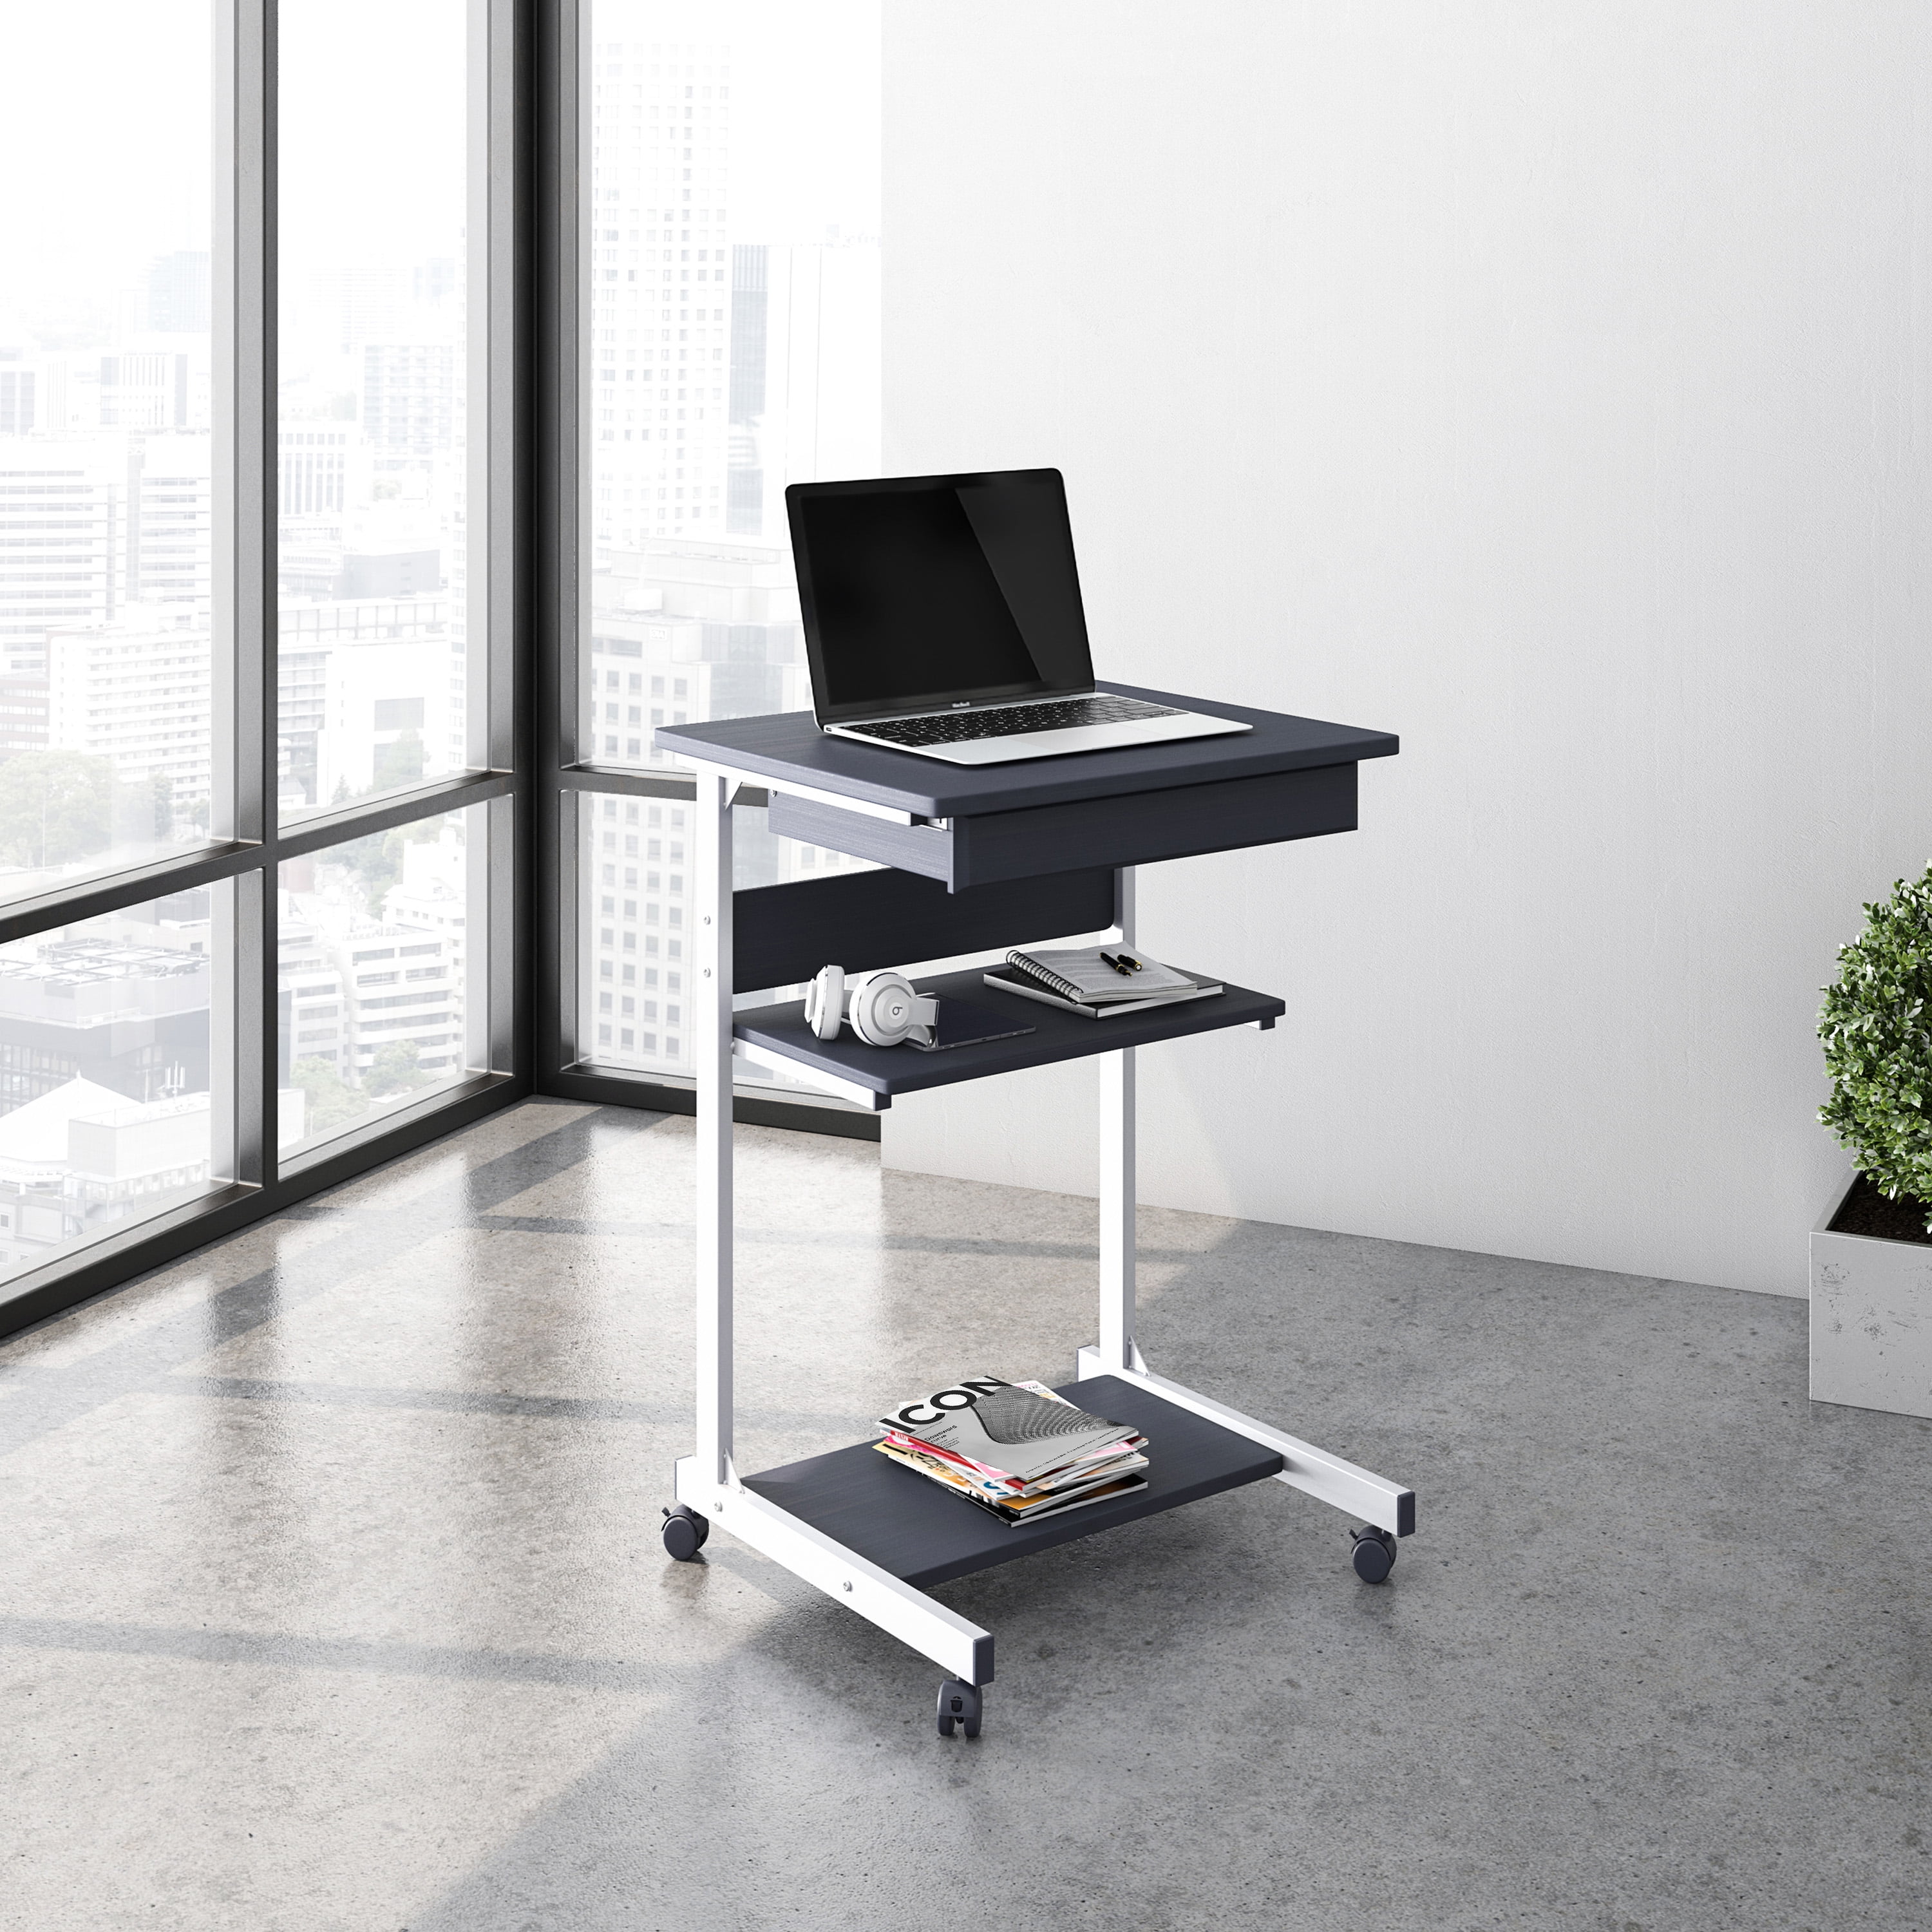 Onespace 50-jn02 Angle and Height Adjustable Mobile Laptop Computer Desk With for sale online